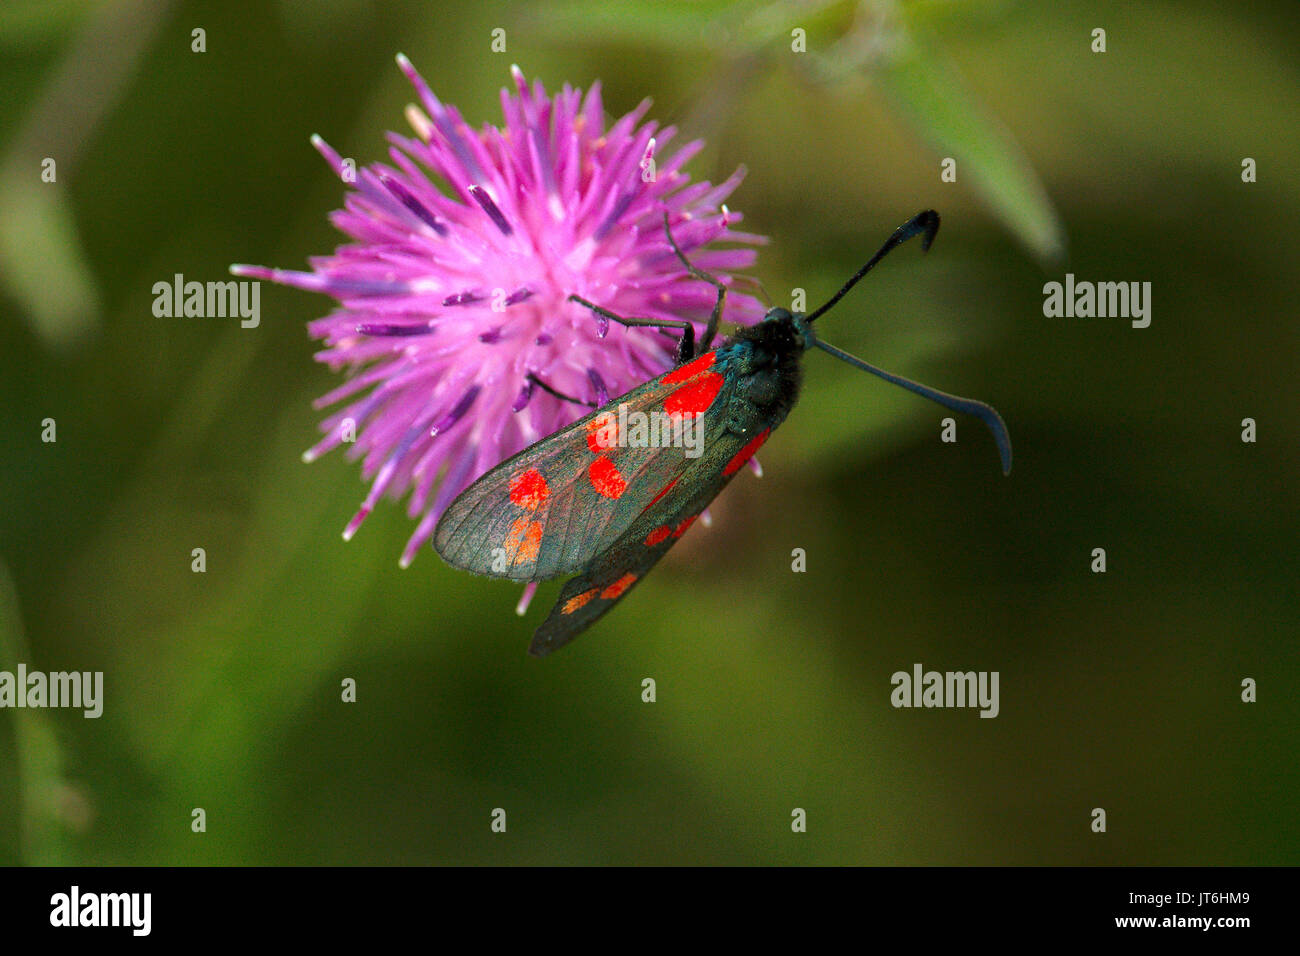 The 5 spot or 6 spot burnet (Zygaena trifolii) at rest on a thistle.  This photograph was taken on the bank of the Taw and Torridge River estuary. Stock Photo